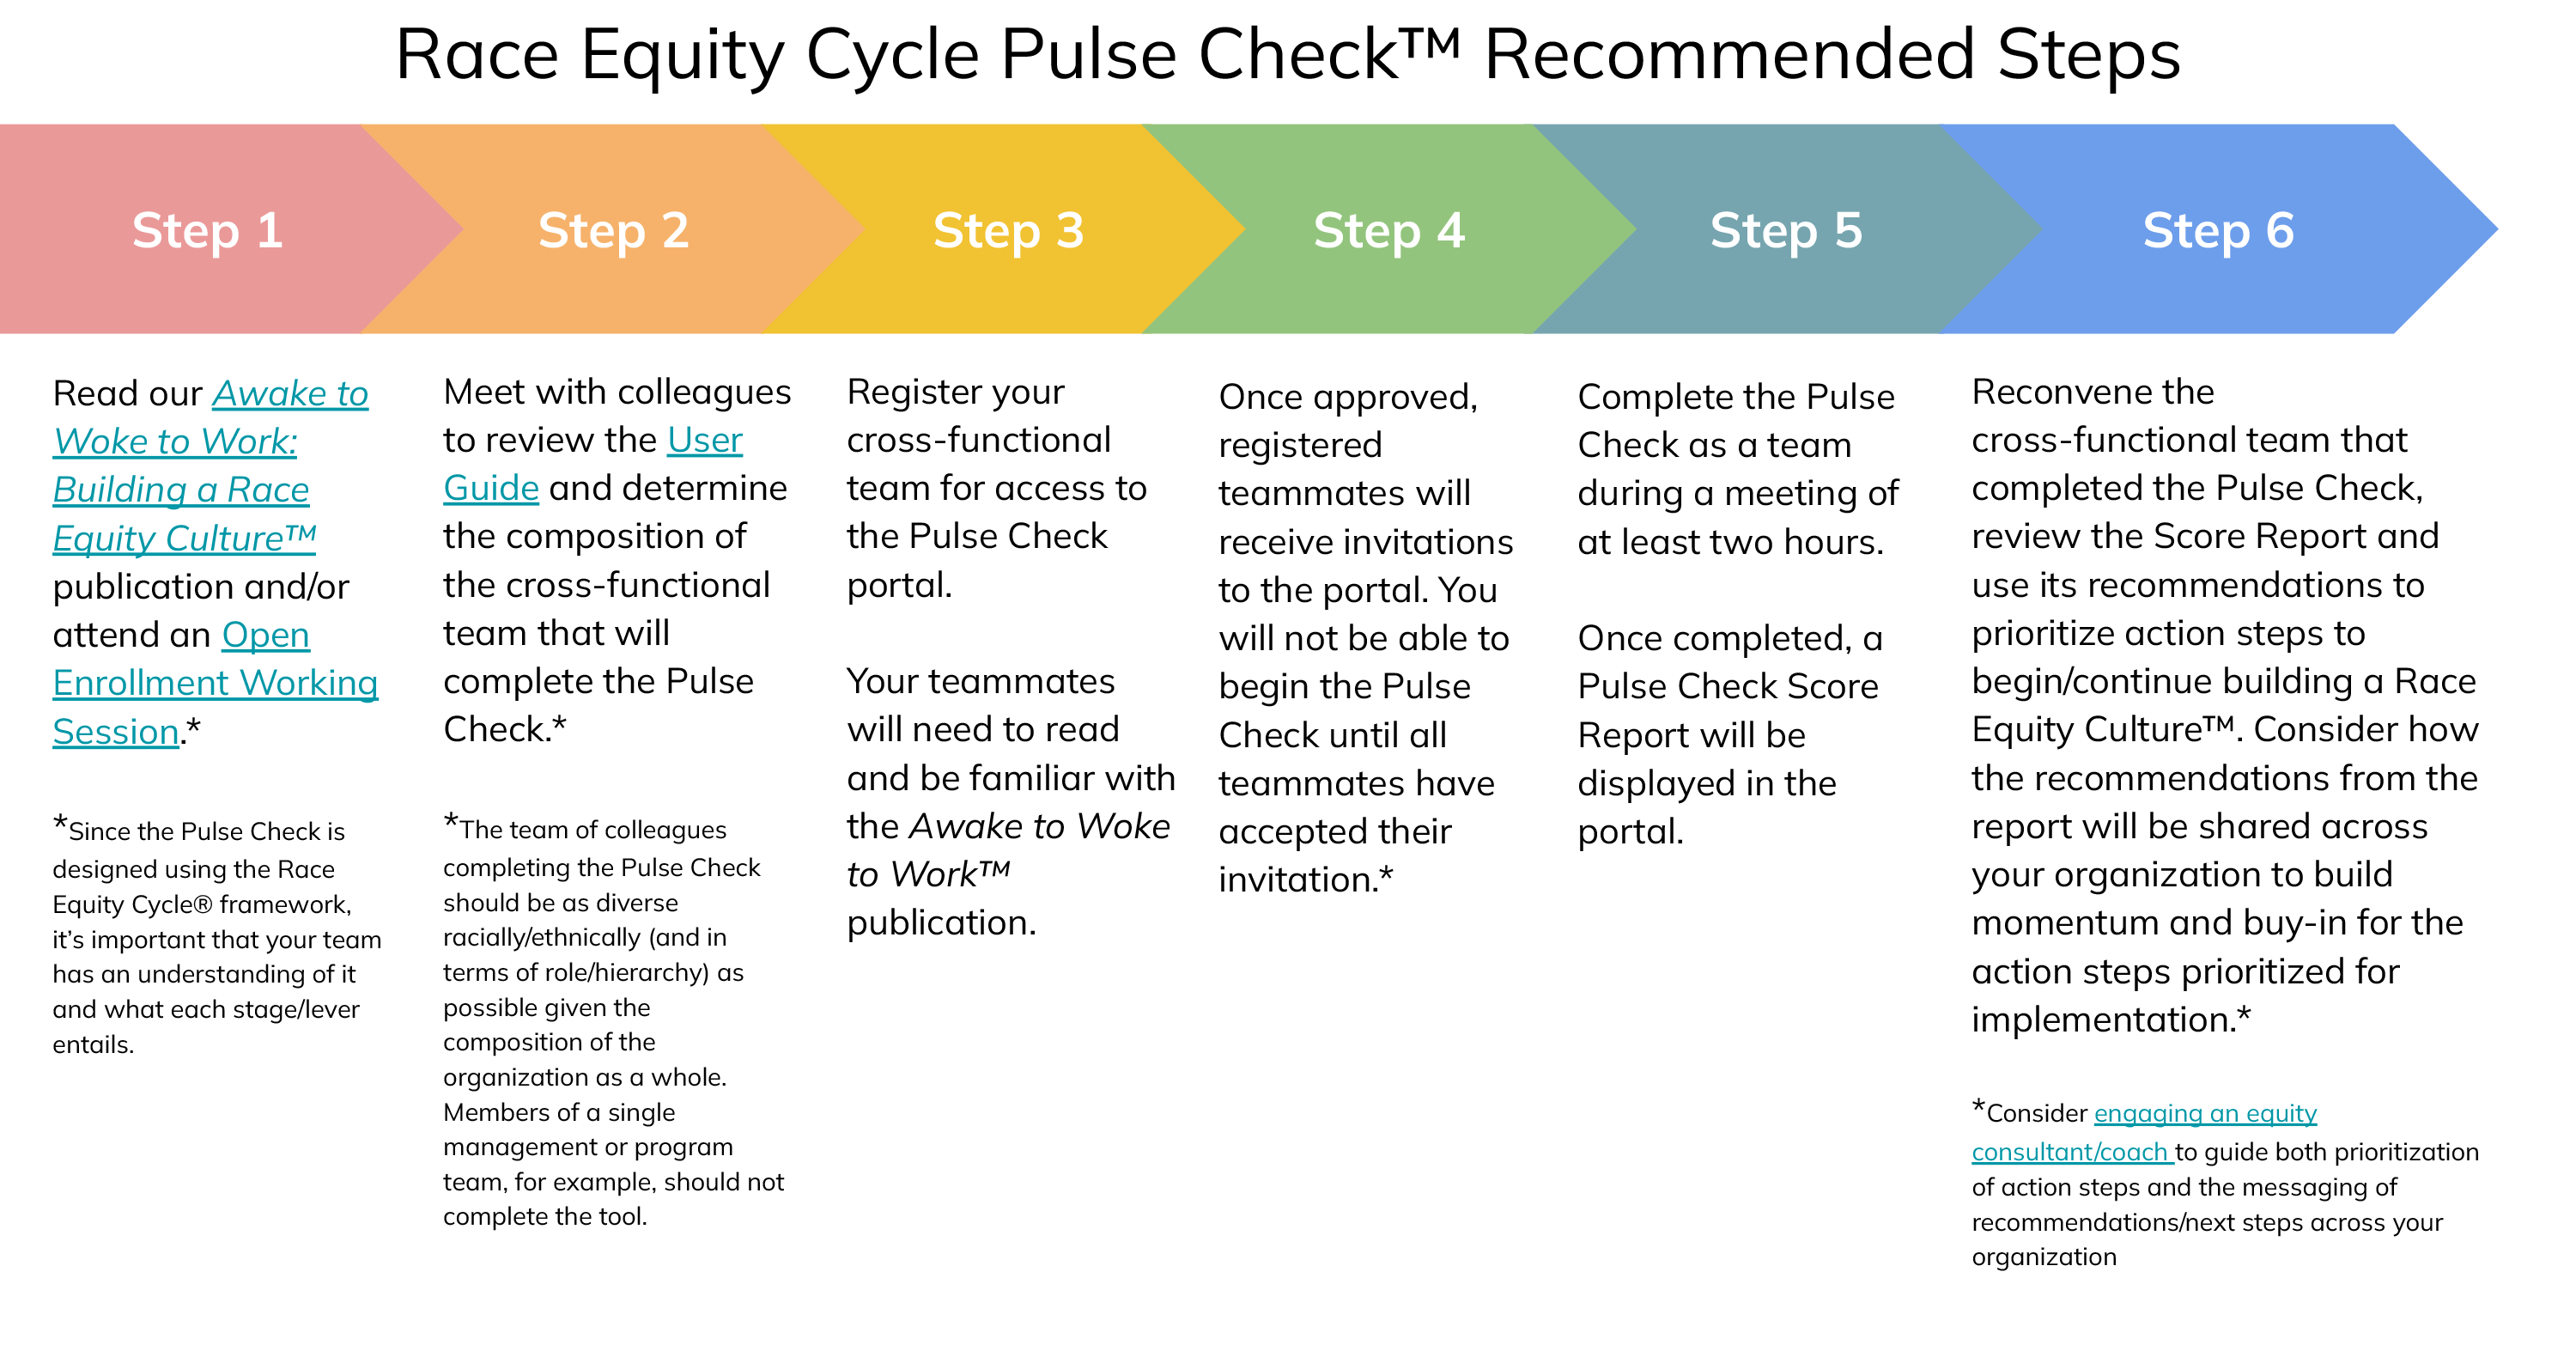 Pulse Check Recommended Steps